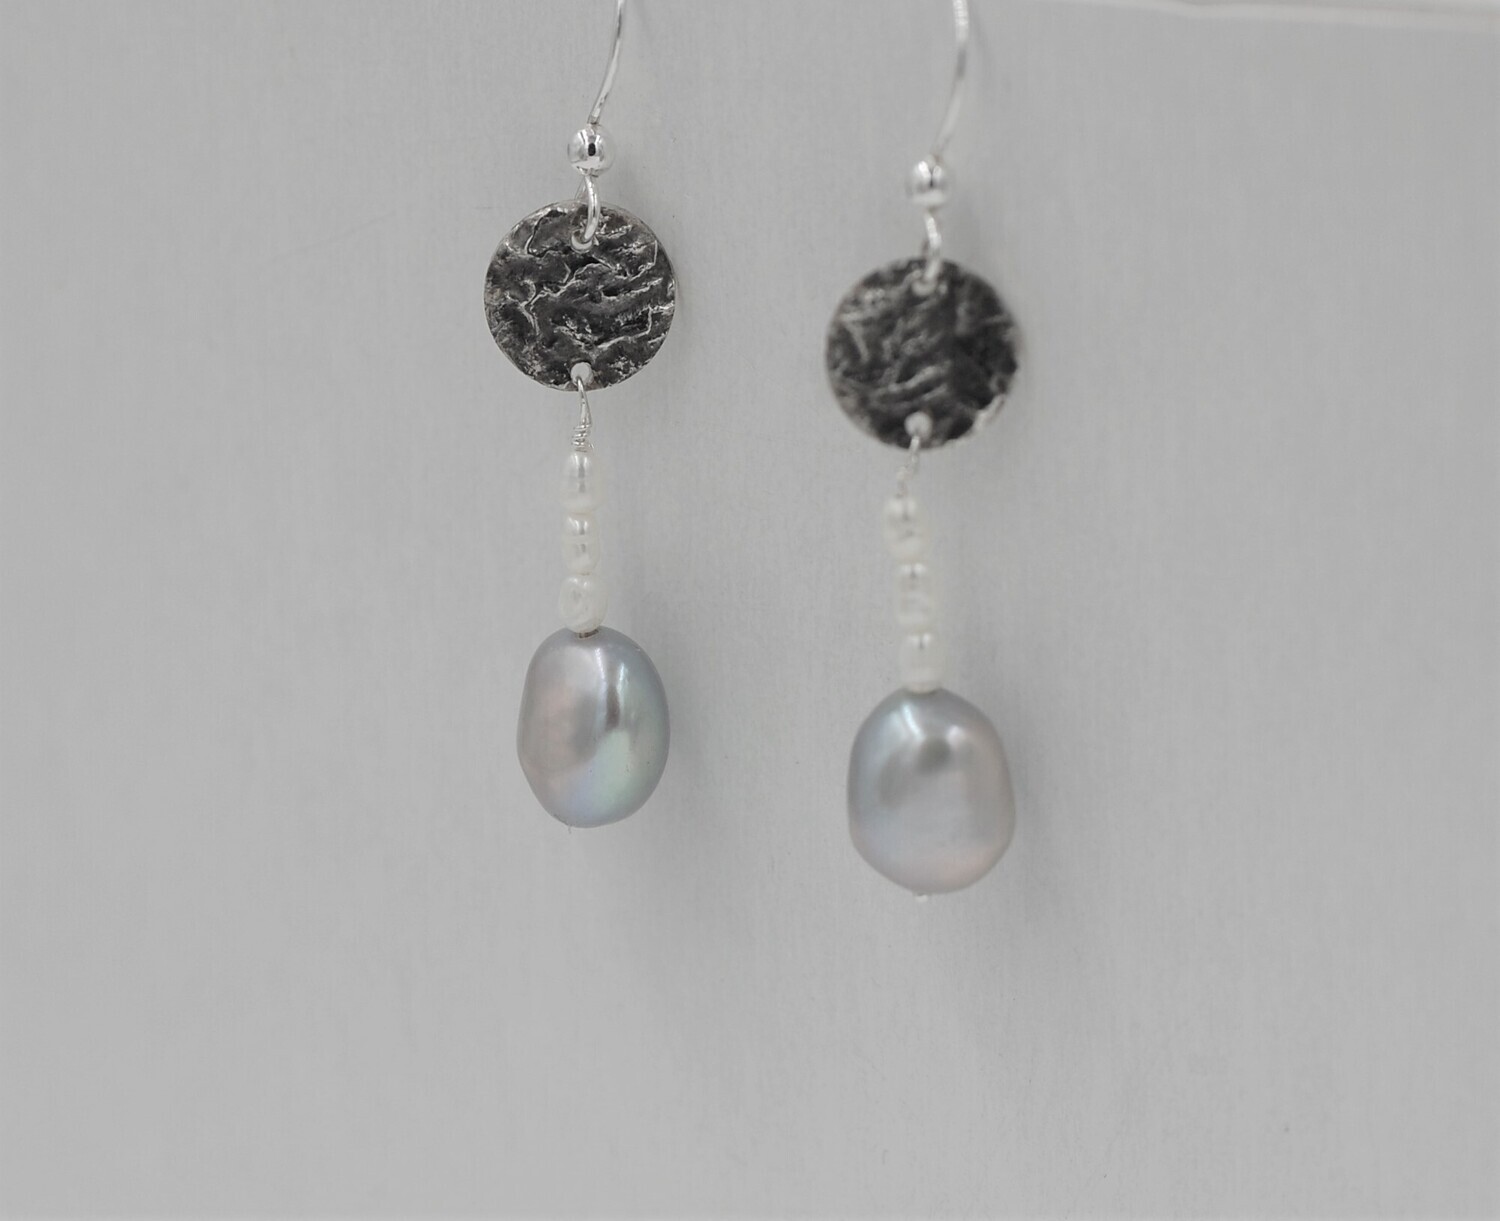 Grey & white pearl drop earrings accented by reticulated sterling silver